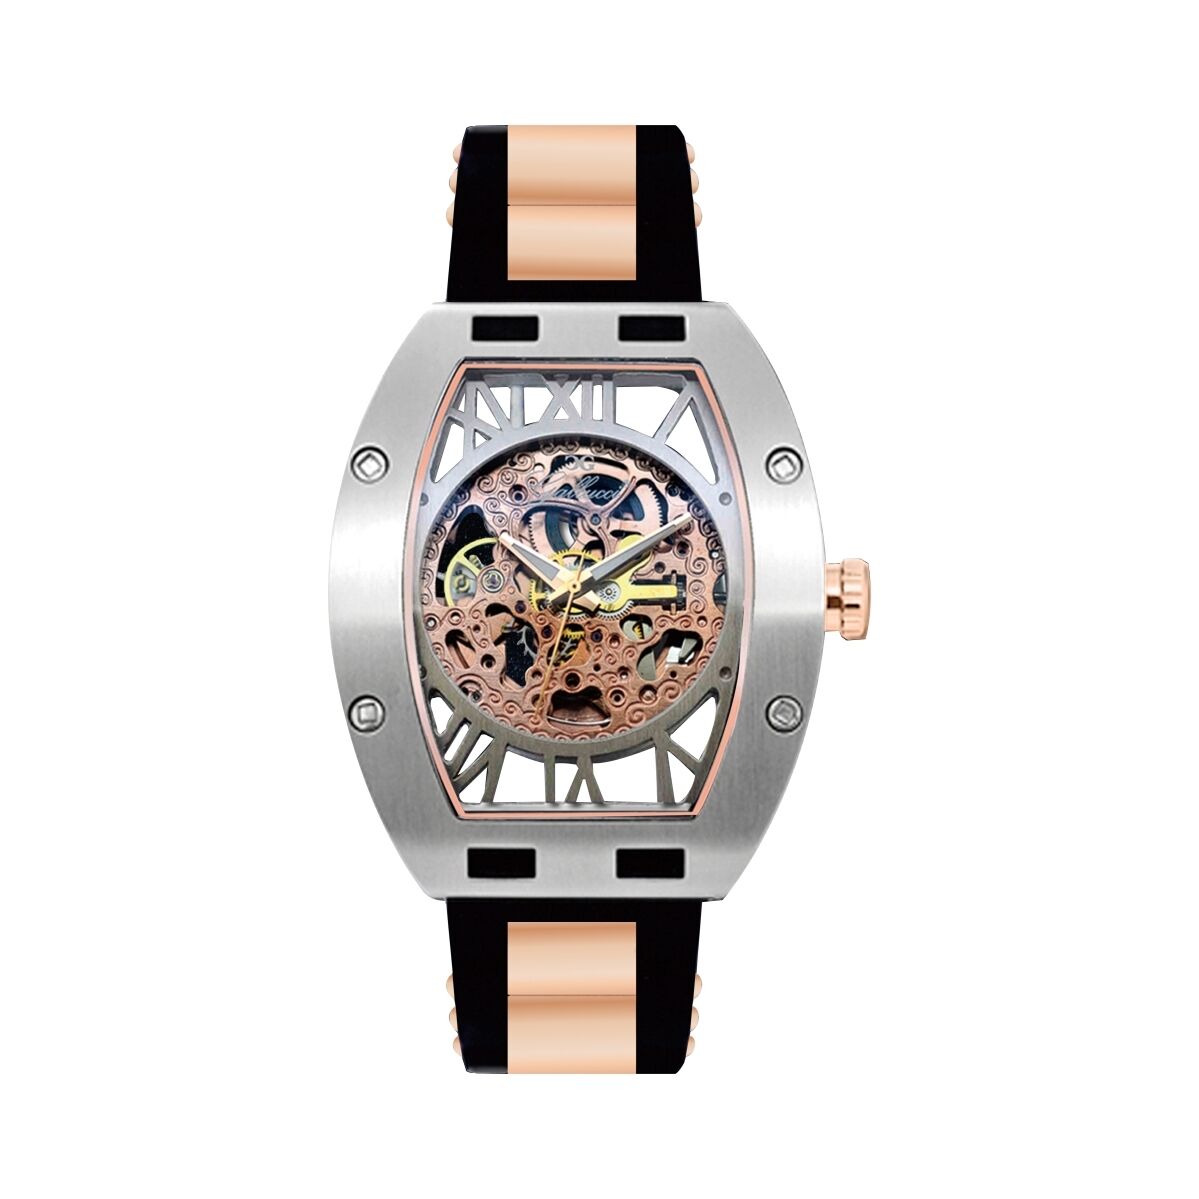 Pre-owned Gallucci Unisex Fashion Skeleton Automatic Wrist Watch With Roman Figure Display In Rose Gold